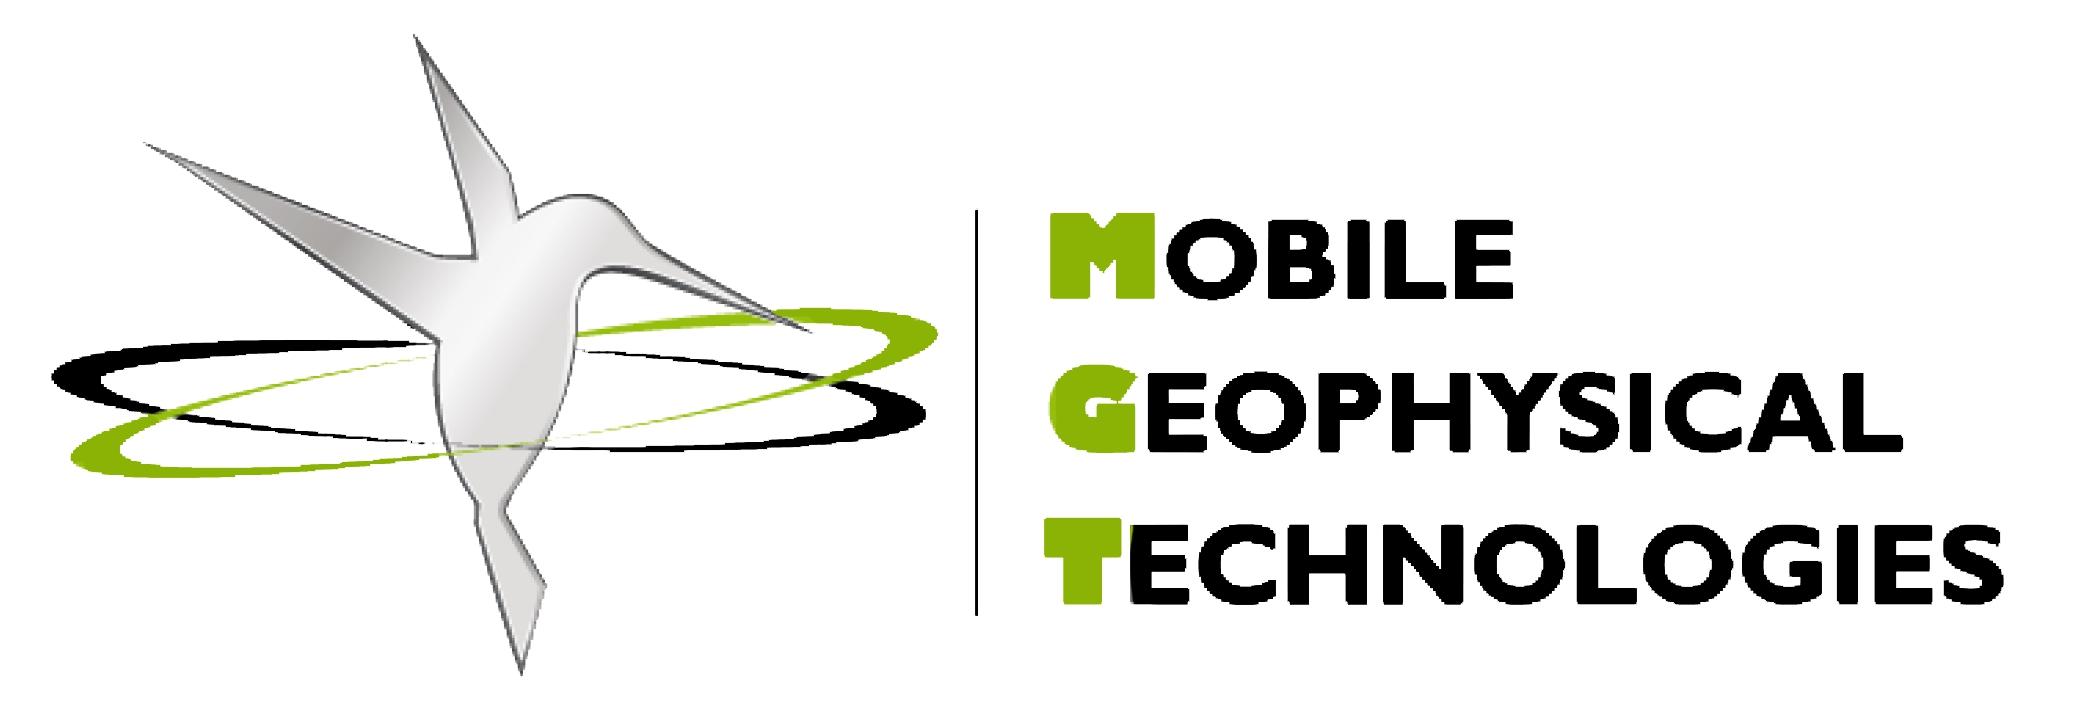 Mobile Geophysical Technologies